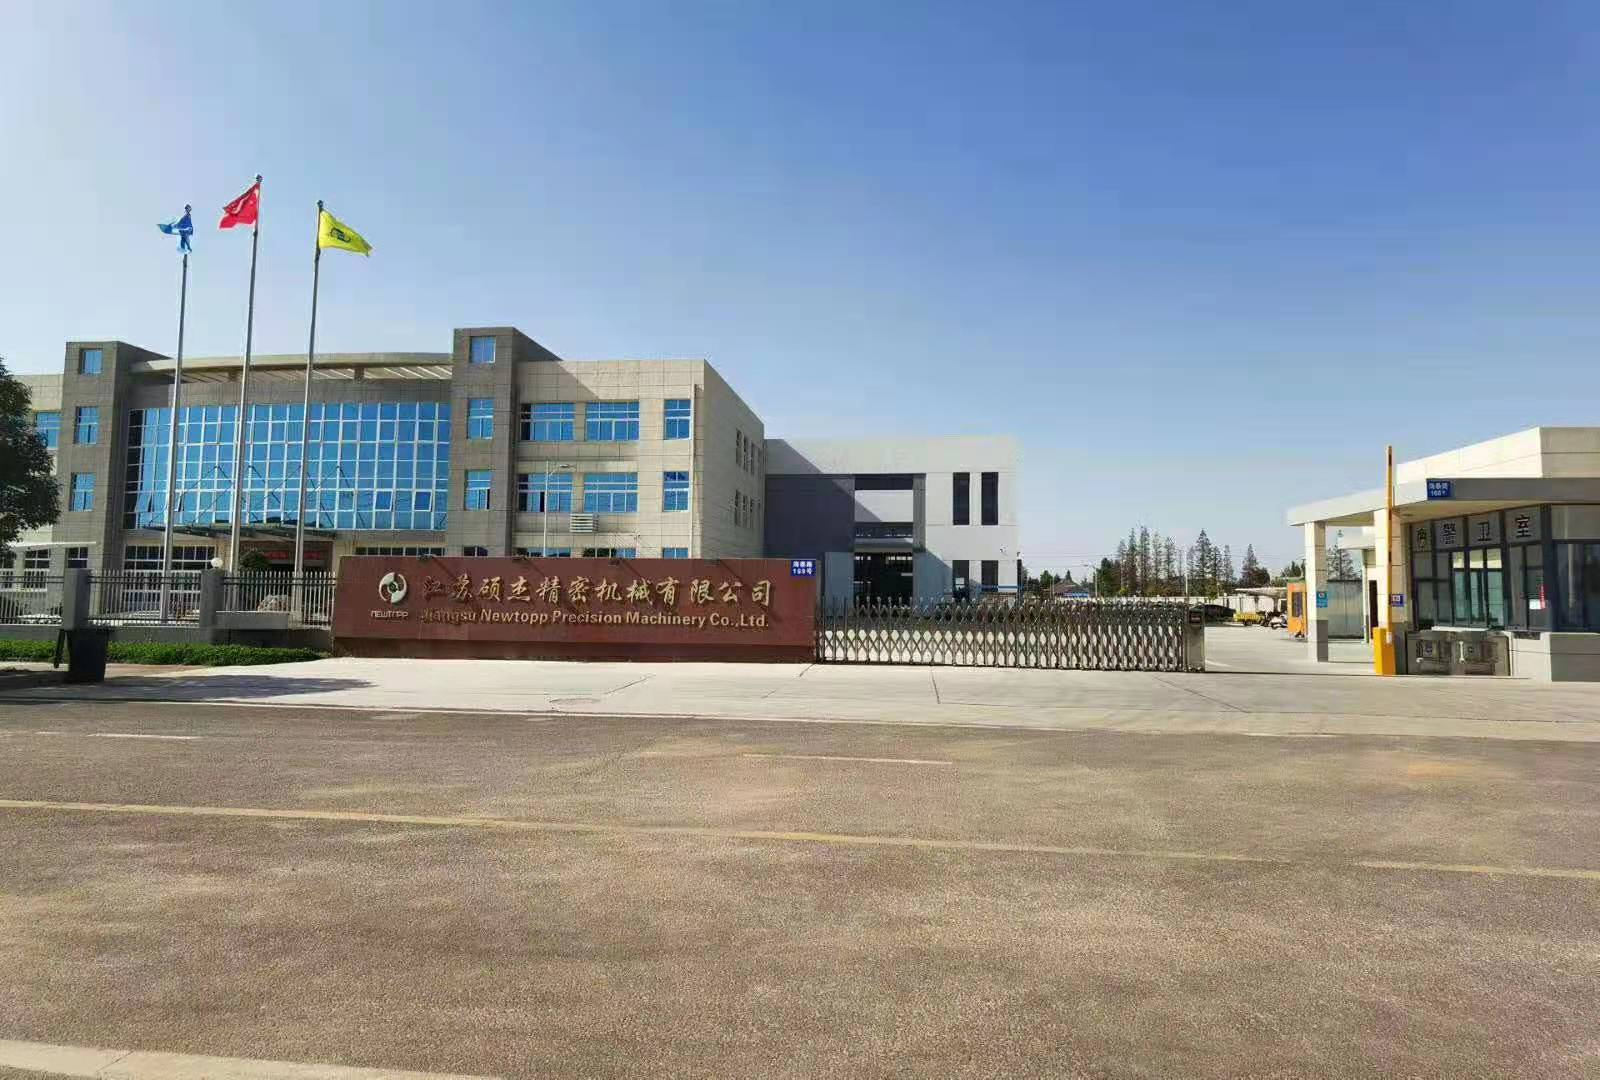 Jiangsu NewTopp Electrical Wire and Cable Mechanical Engineering Technology Research Center was established in 2020